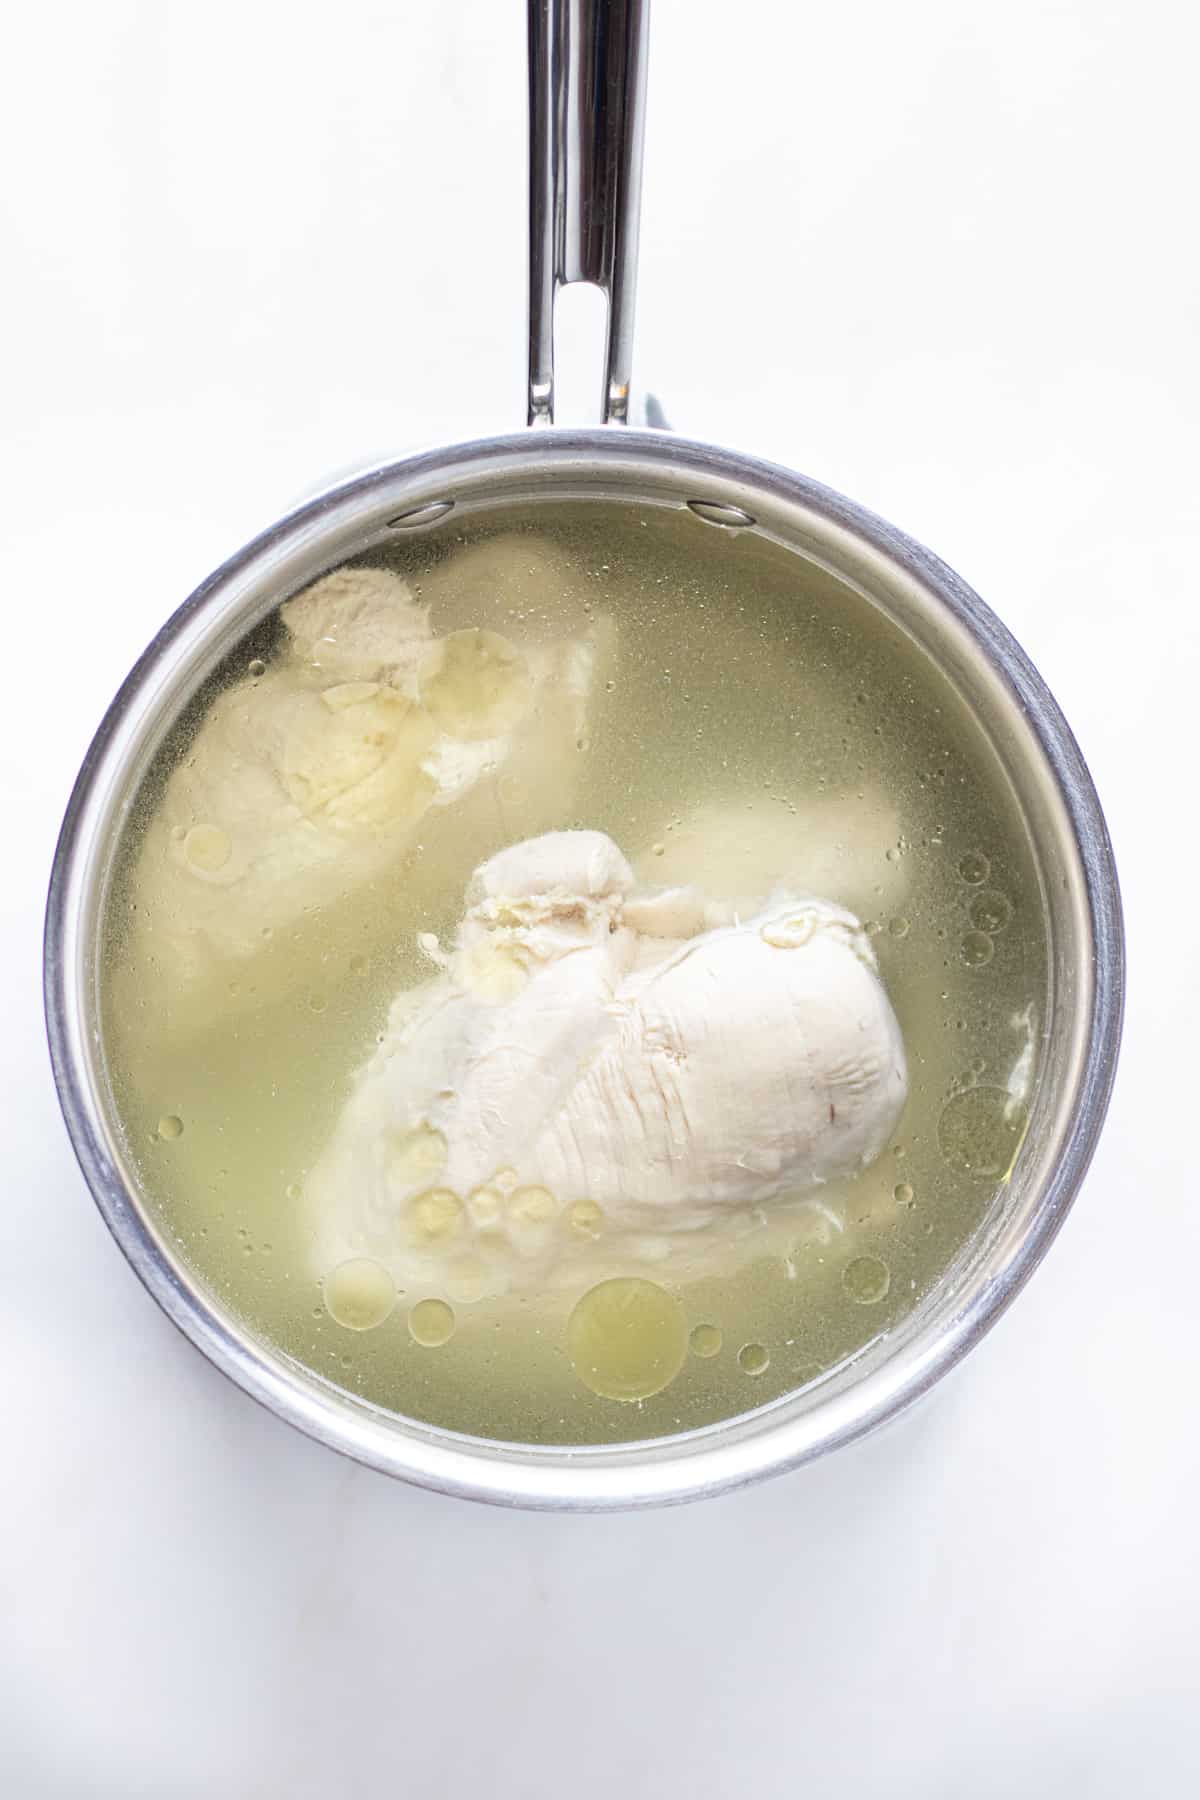 Boiled chicken breasts in a stainless steel pot, submerged in the water.